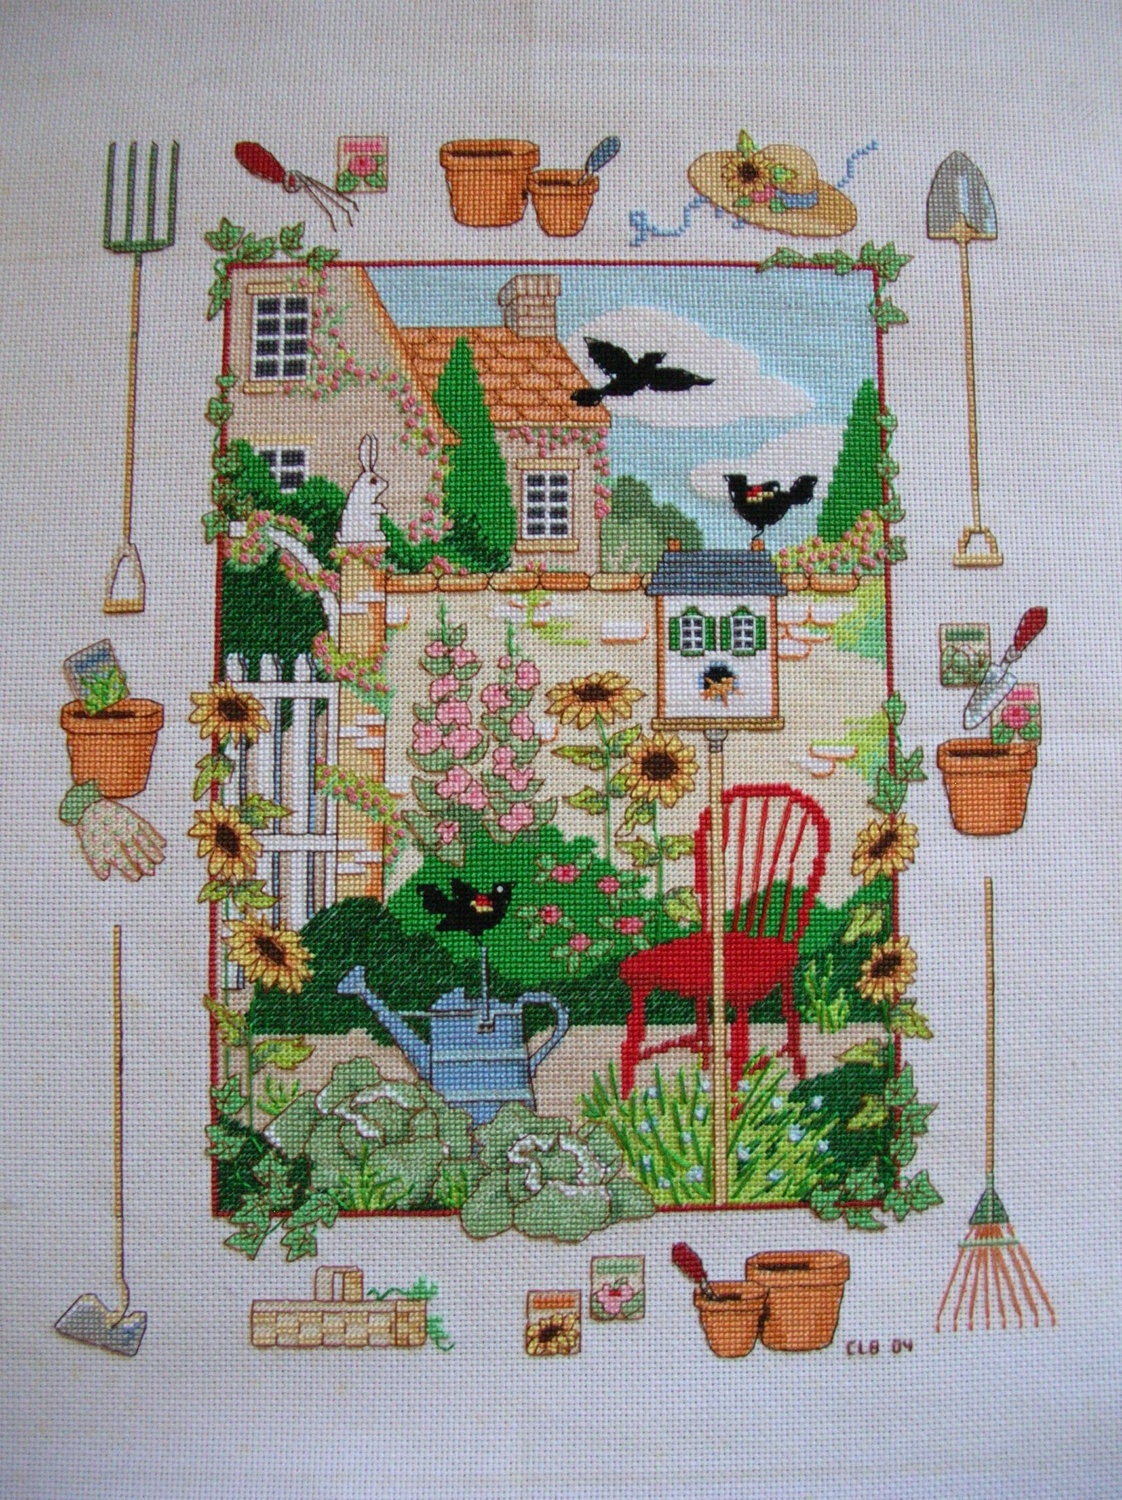 Cross Stitch Sampler  Gardening Theme  Completed and Ready to Frame - LittlestSister